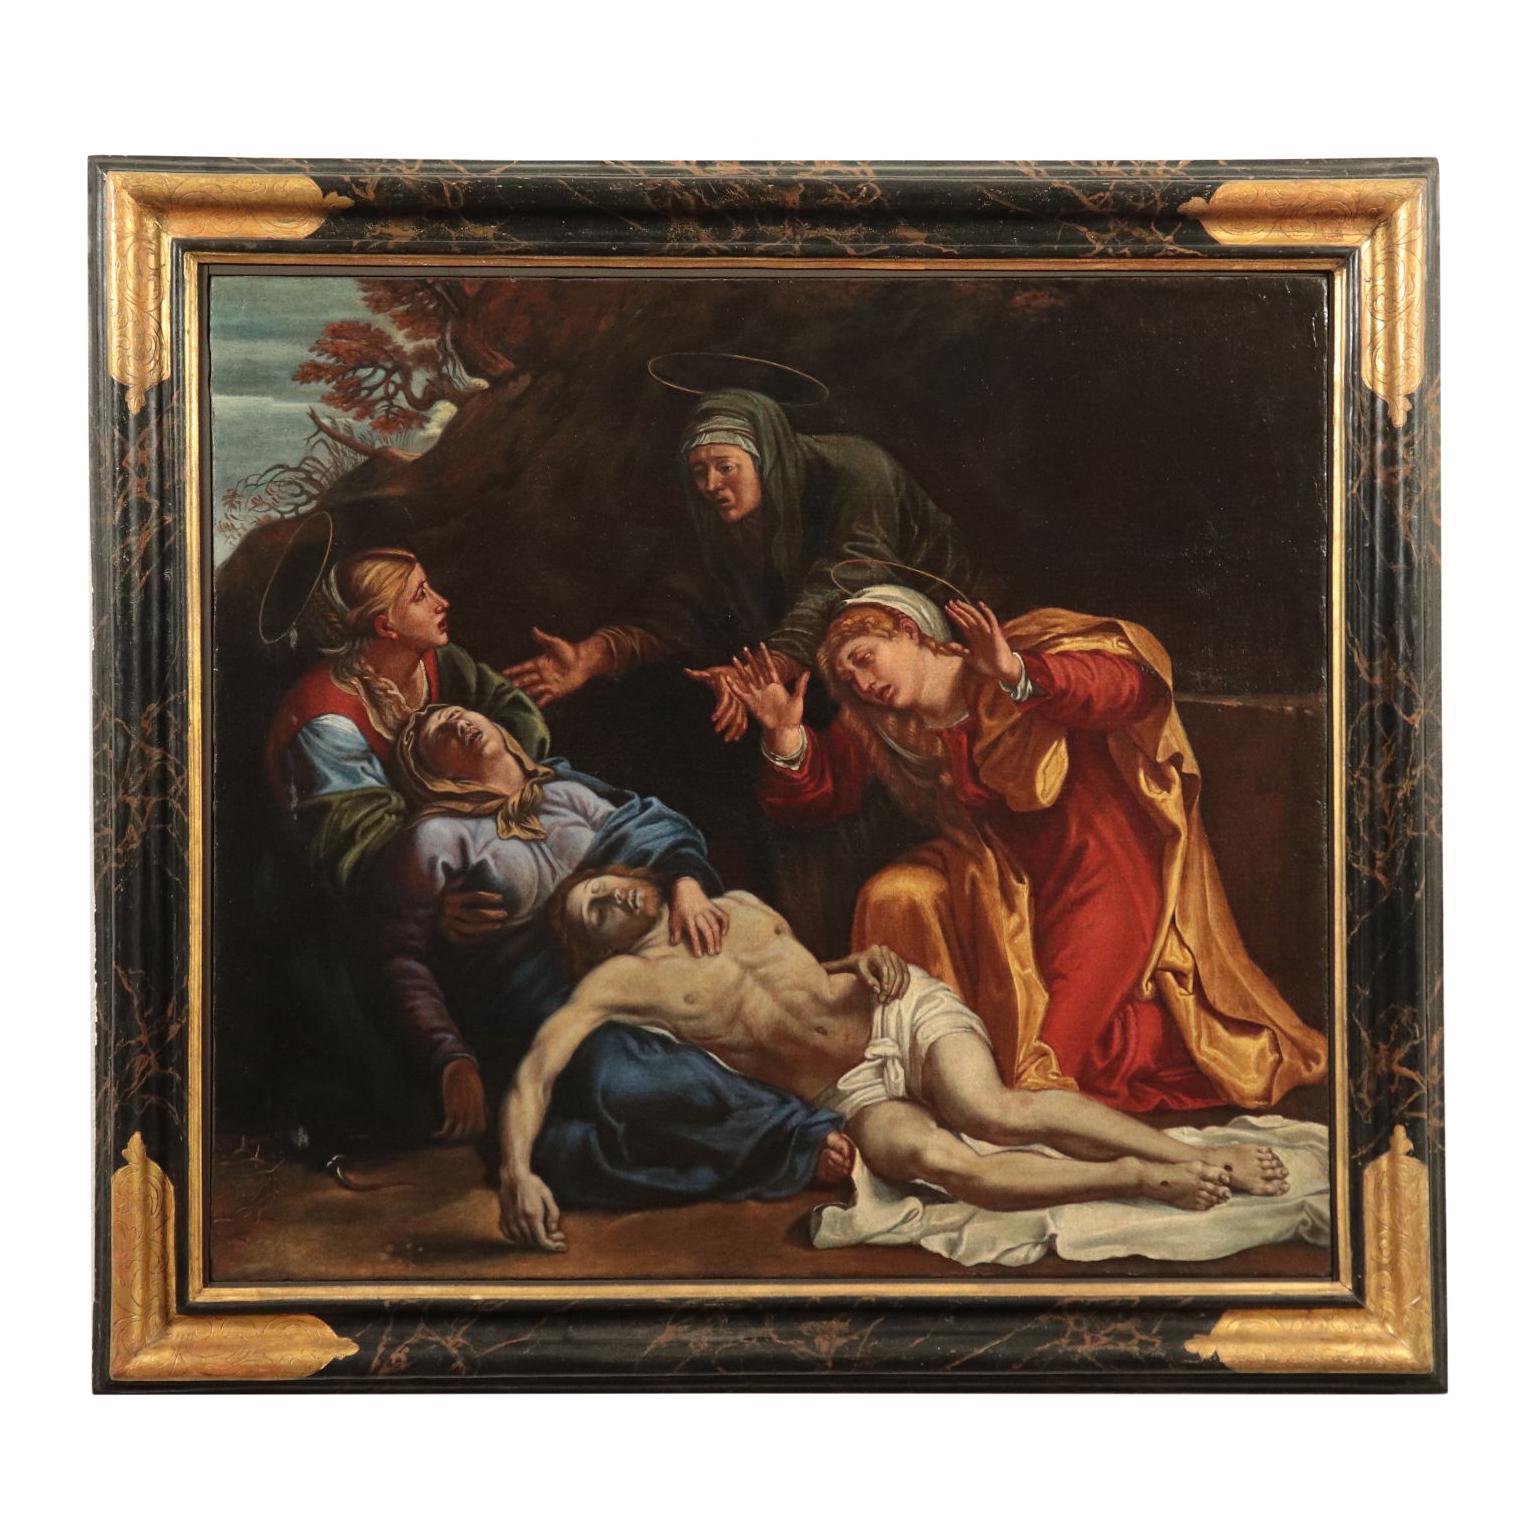 Oil on canvas. Copy of the famous painting of Annibale Carracci, made between 1604-1606 and today preserved at the National Gallery of London.
The scene takes place in front of the cave of the sepulcher where Jesus is going to be buried; we can see